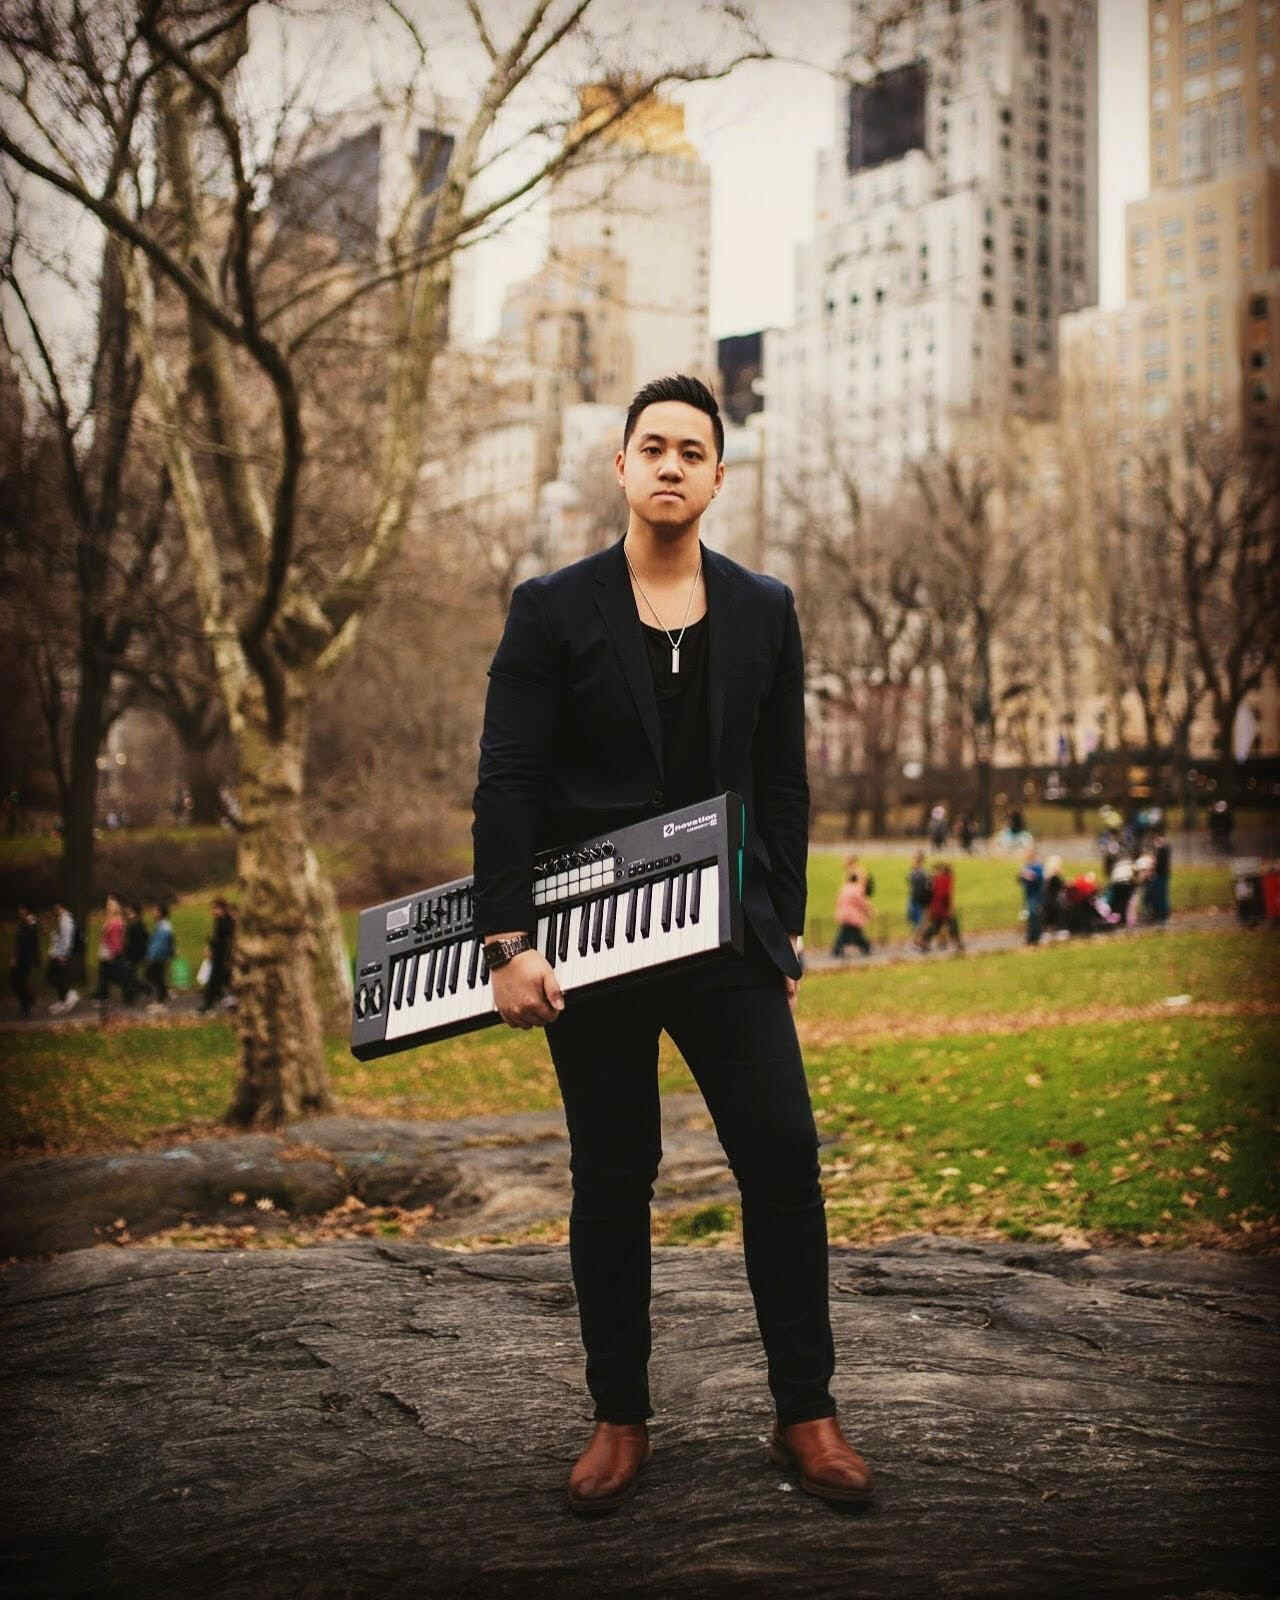 Born in Rhode Island and influenced by jazz greats, ZENG is using his studies from U Penn to bring you experimental beats. Listen to his songs now!